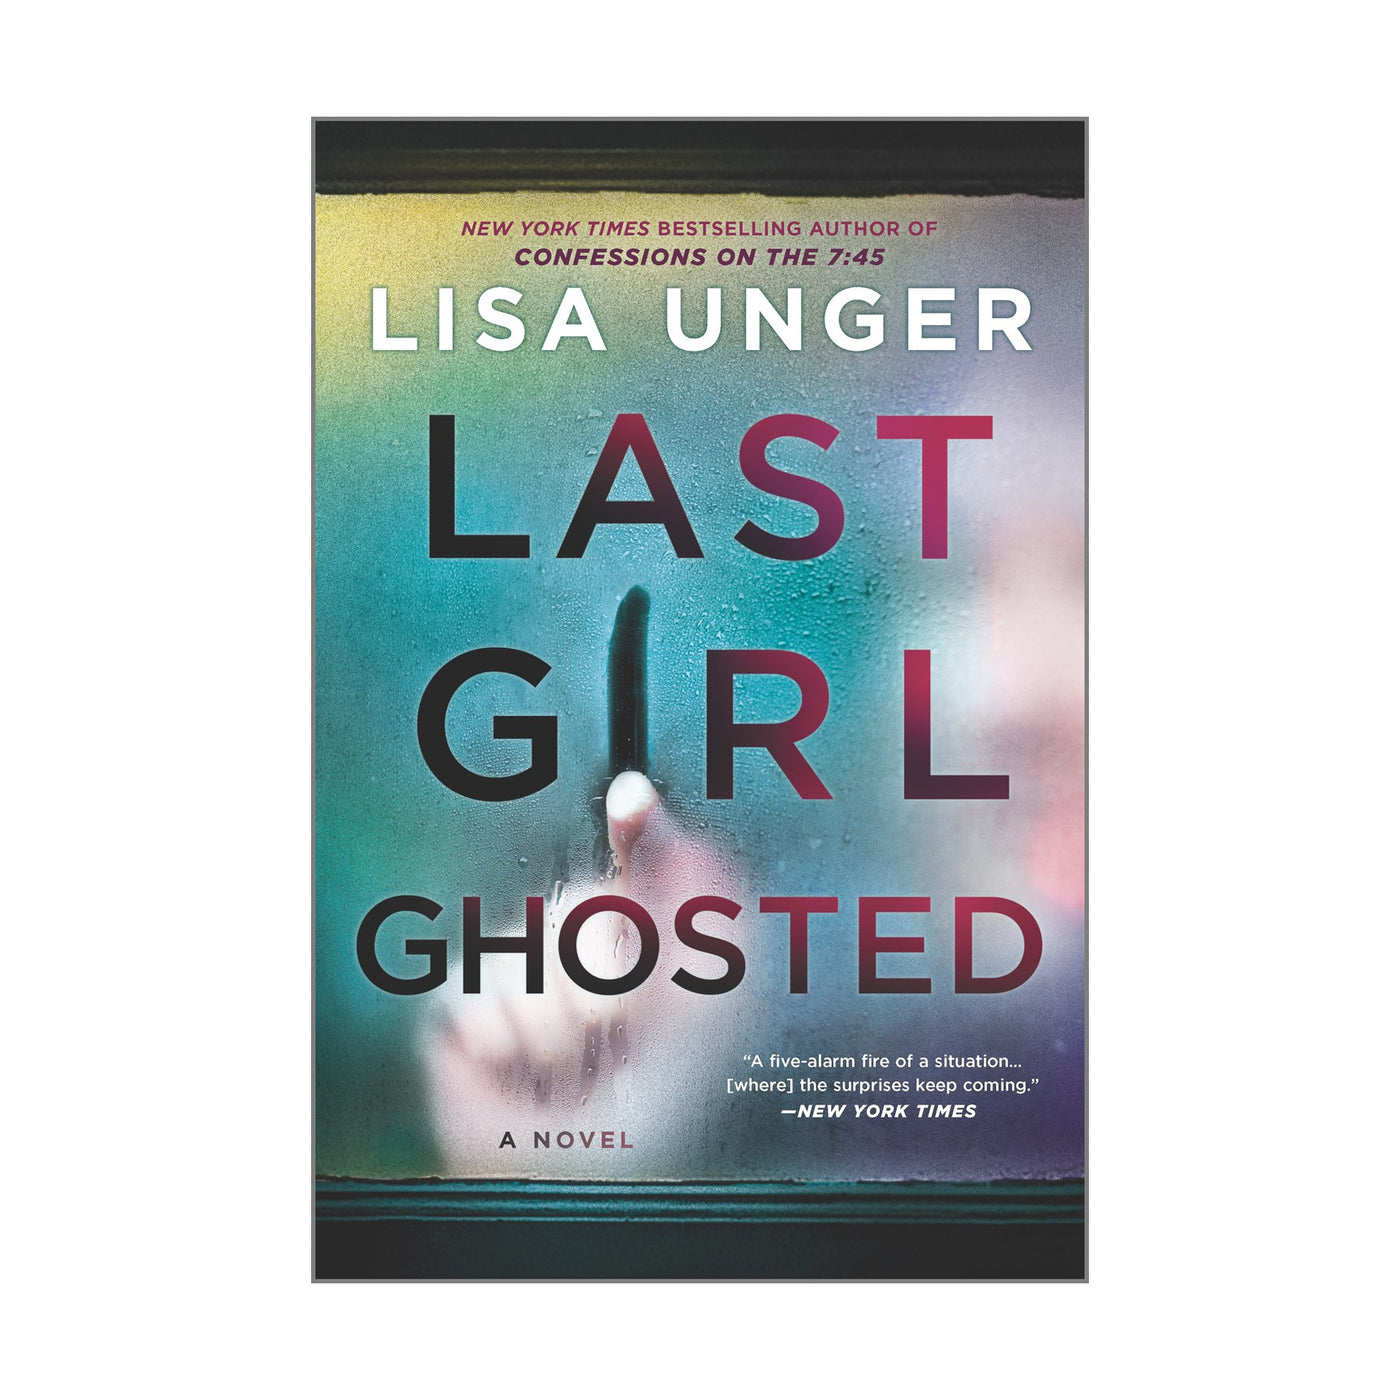 Last Girl Ghosted